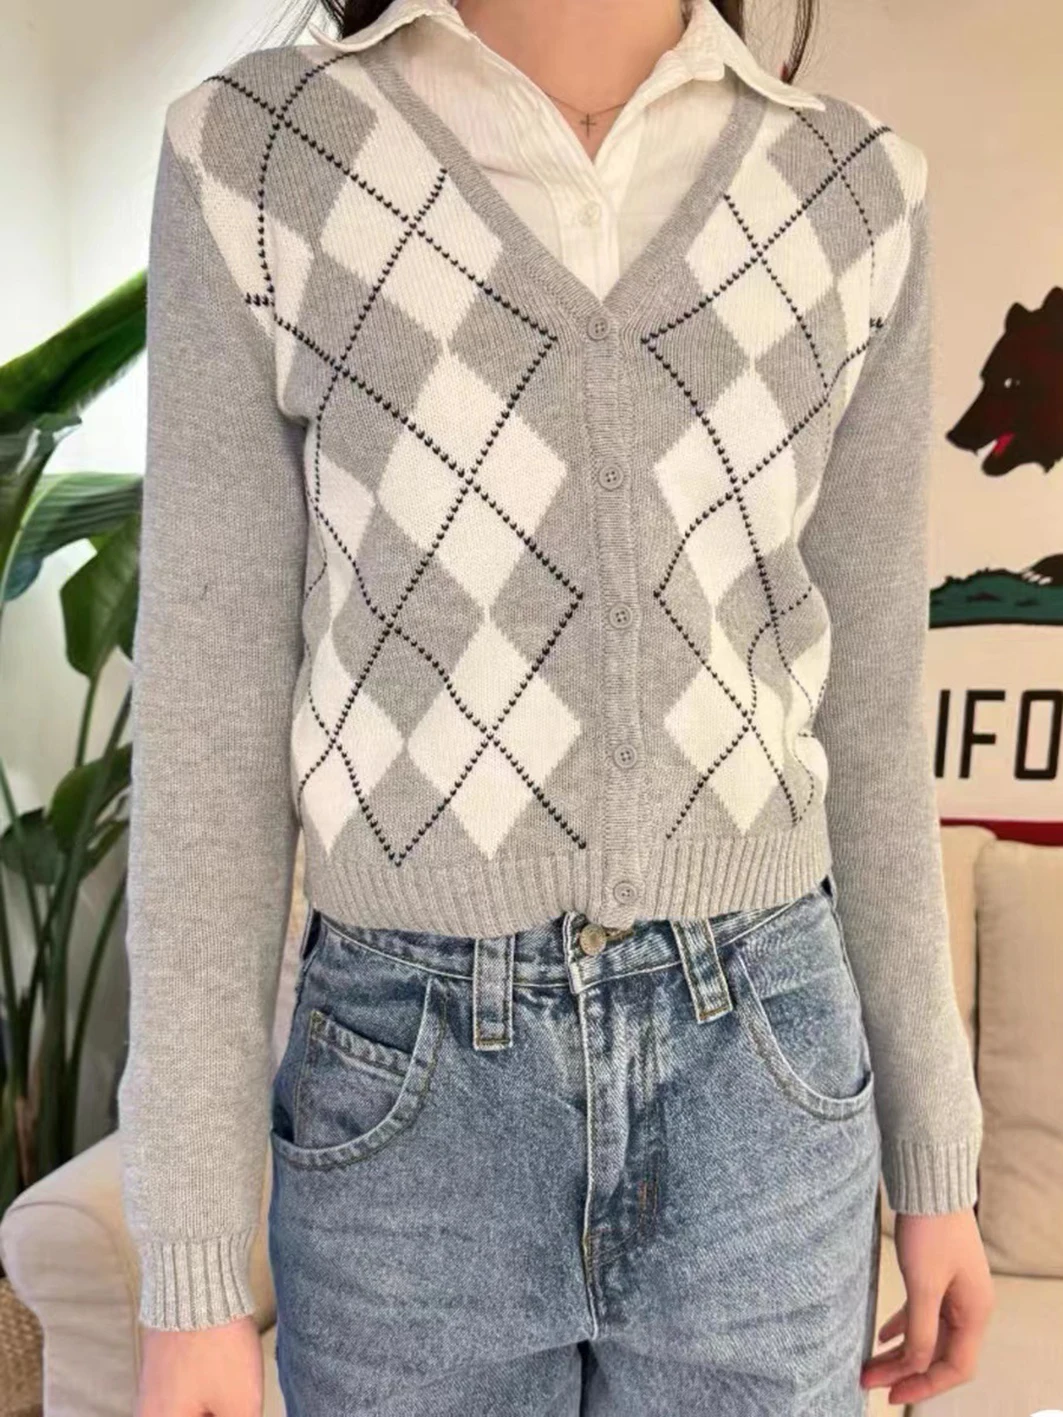 

Gray Argyle Cropped Sweater Cardigan V-neck Slim Crop Top For Woman Casual Sweet Preppy Style Long Sleeve Sweaters Coat Spring